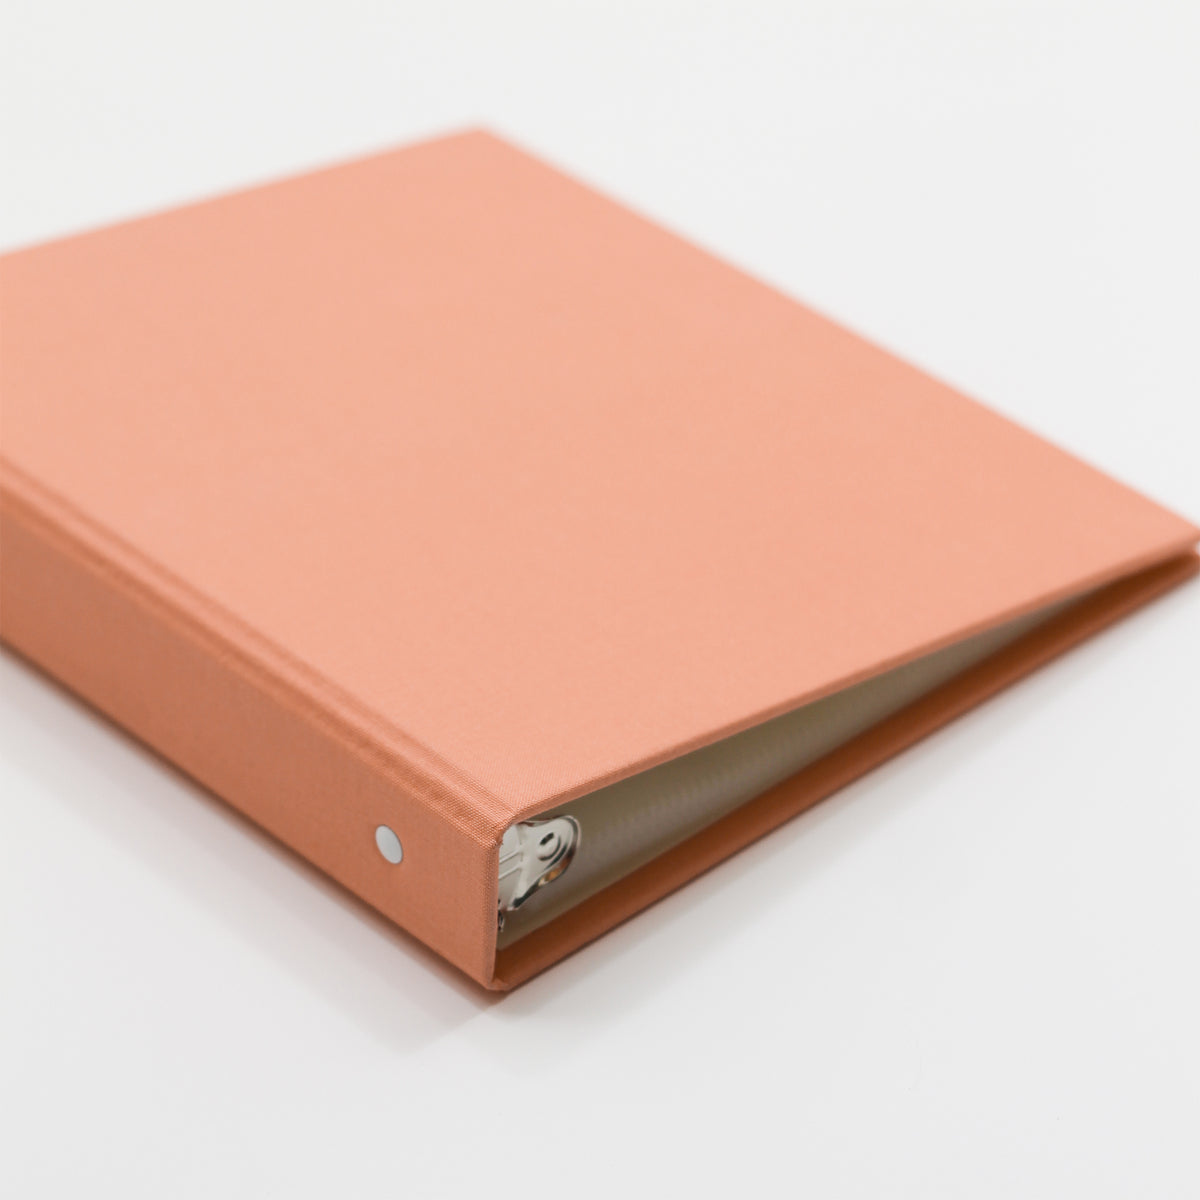 Medium Photo Binder | for 4 x 6 photos | with Coral Cotton Cover